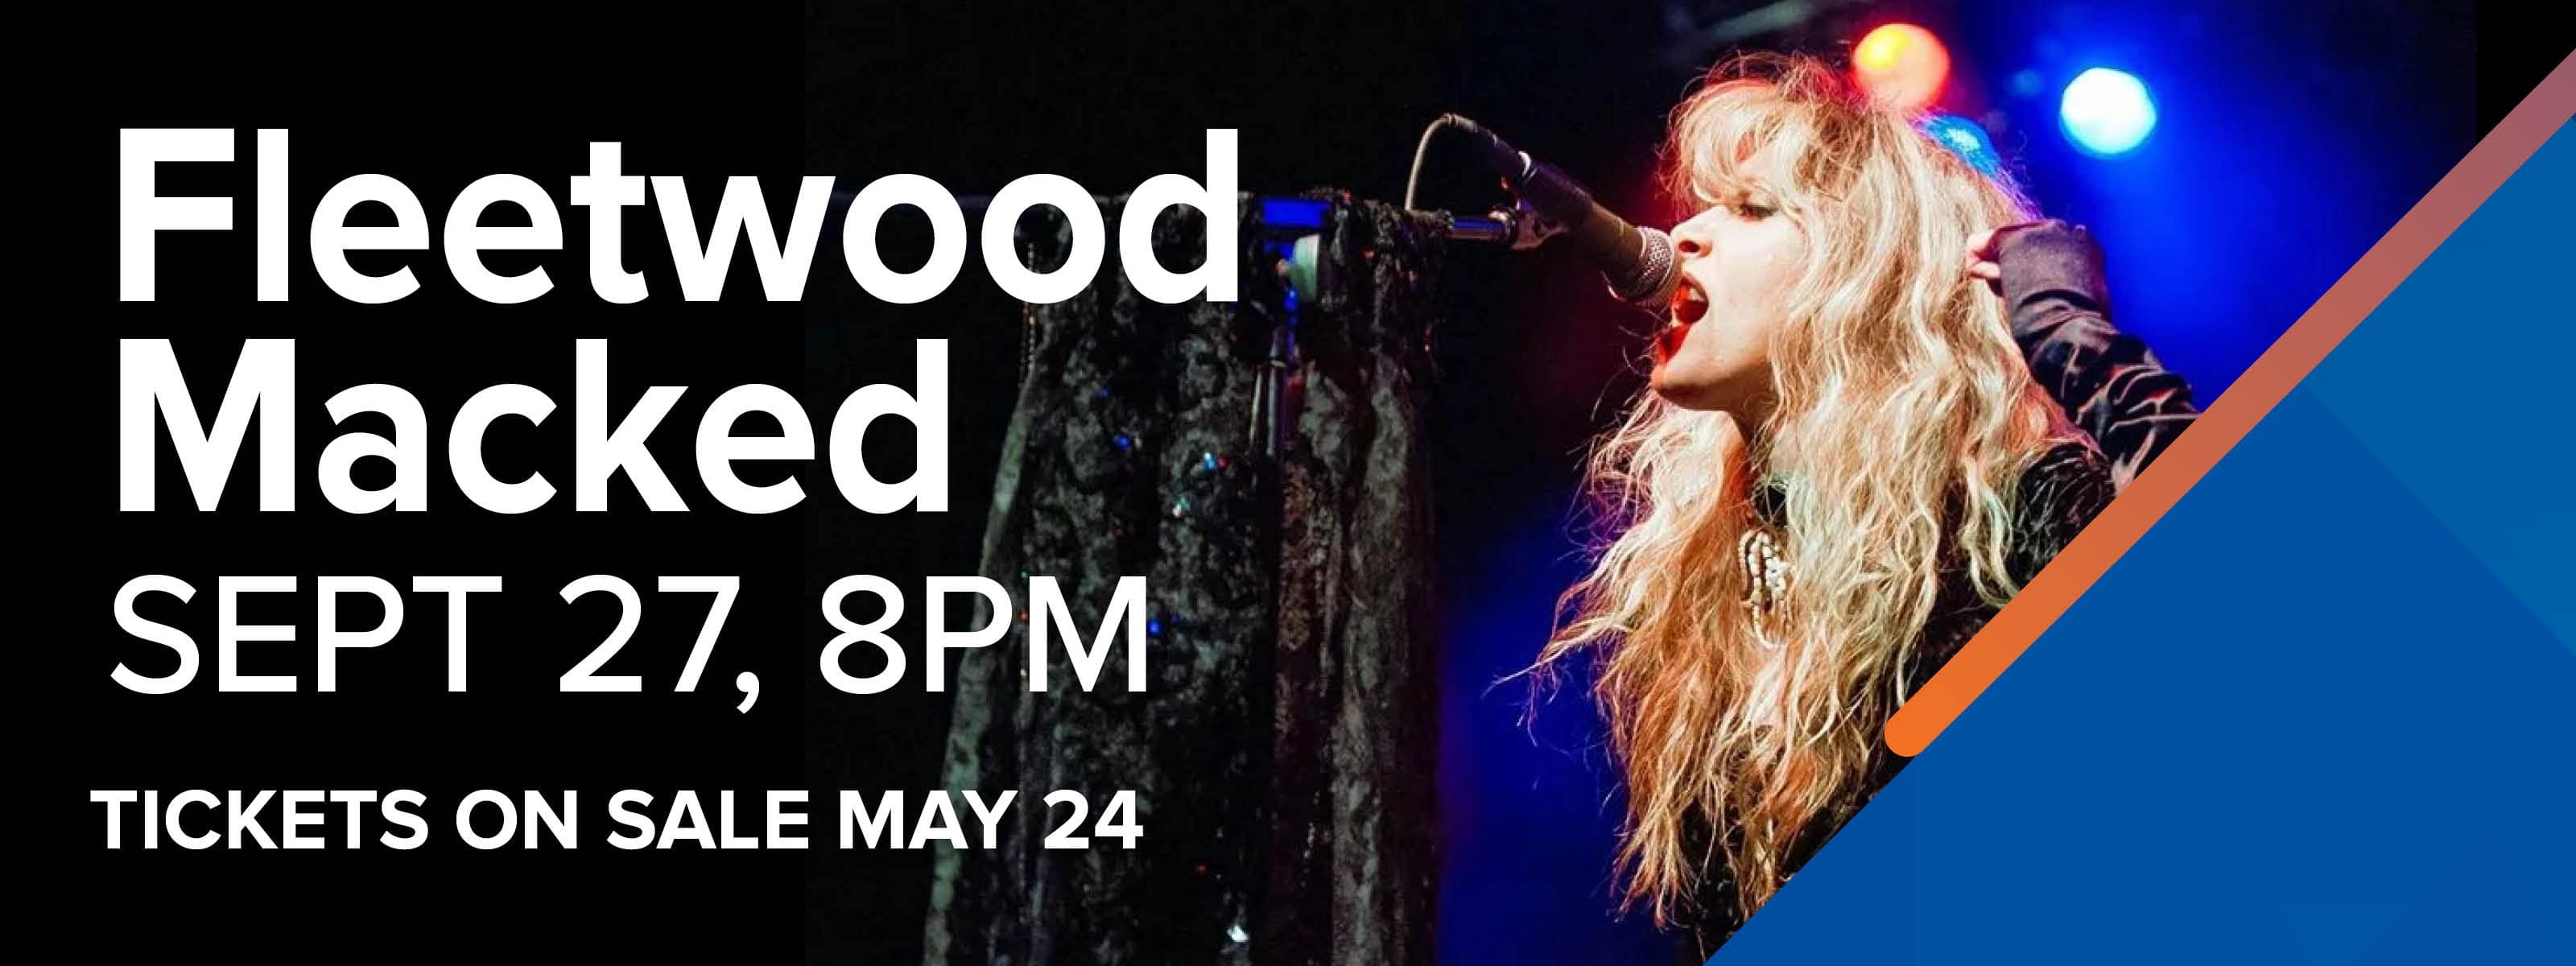 Fleetwood Macked: The Ultimate Fleetwood Mac Tribute - September 27, 8:00pm Tickets On Sale May 24 @ 10:00am